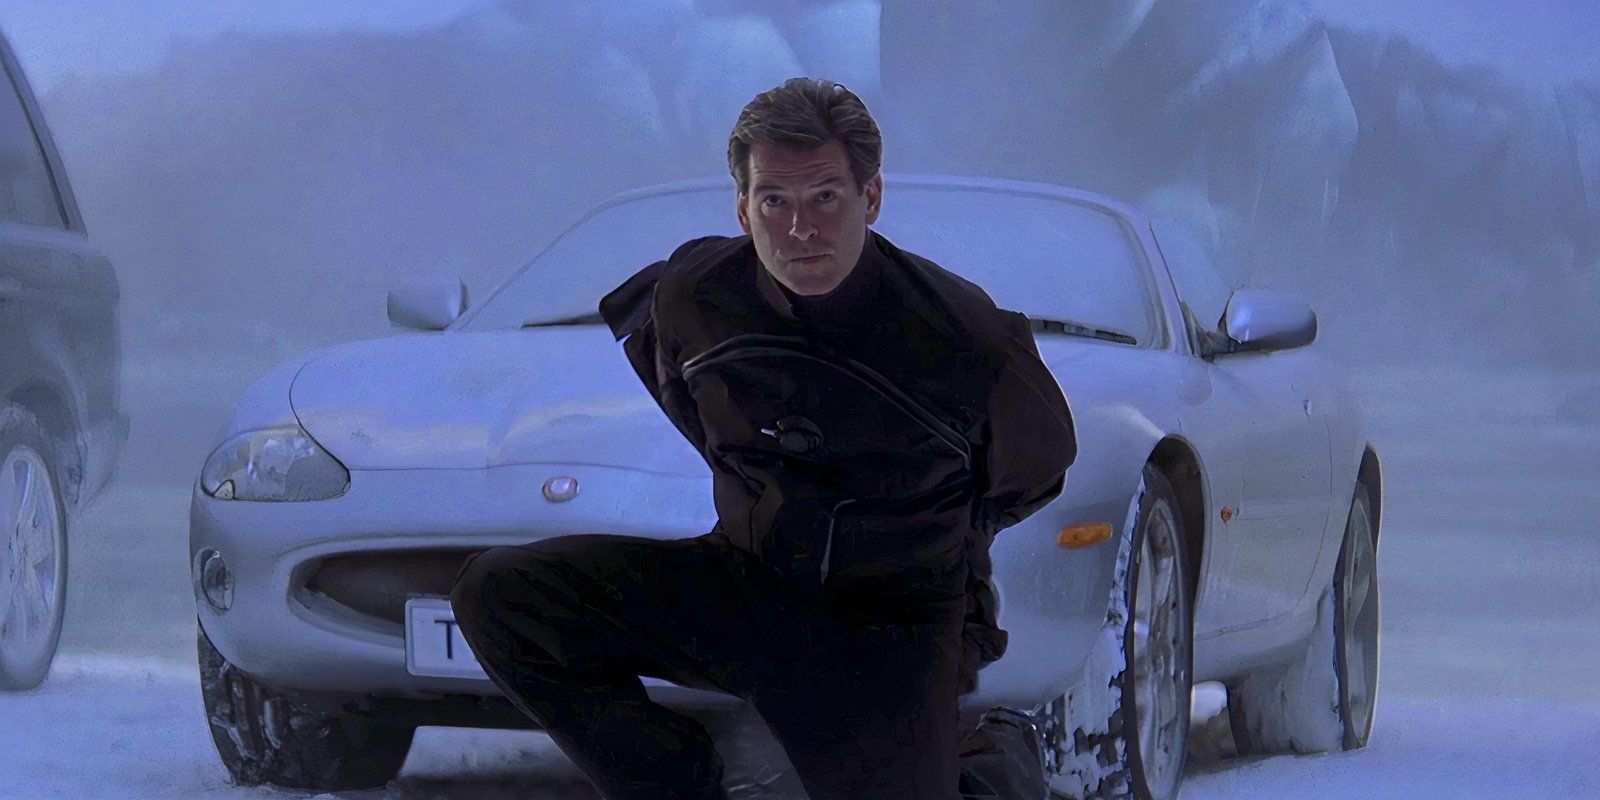 Pierce Brosnan takes off his coat in front of an Aston Martin in “Die Another Day”